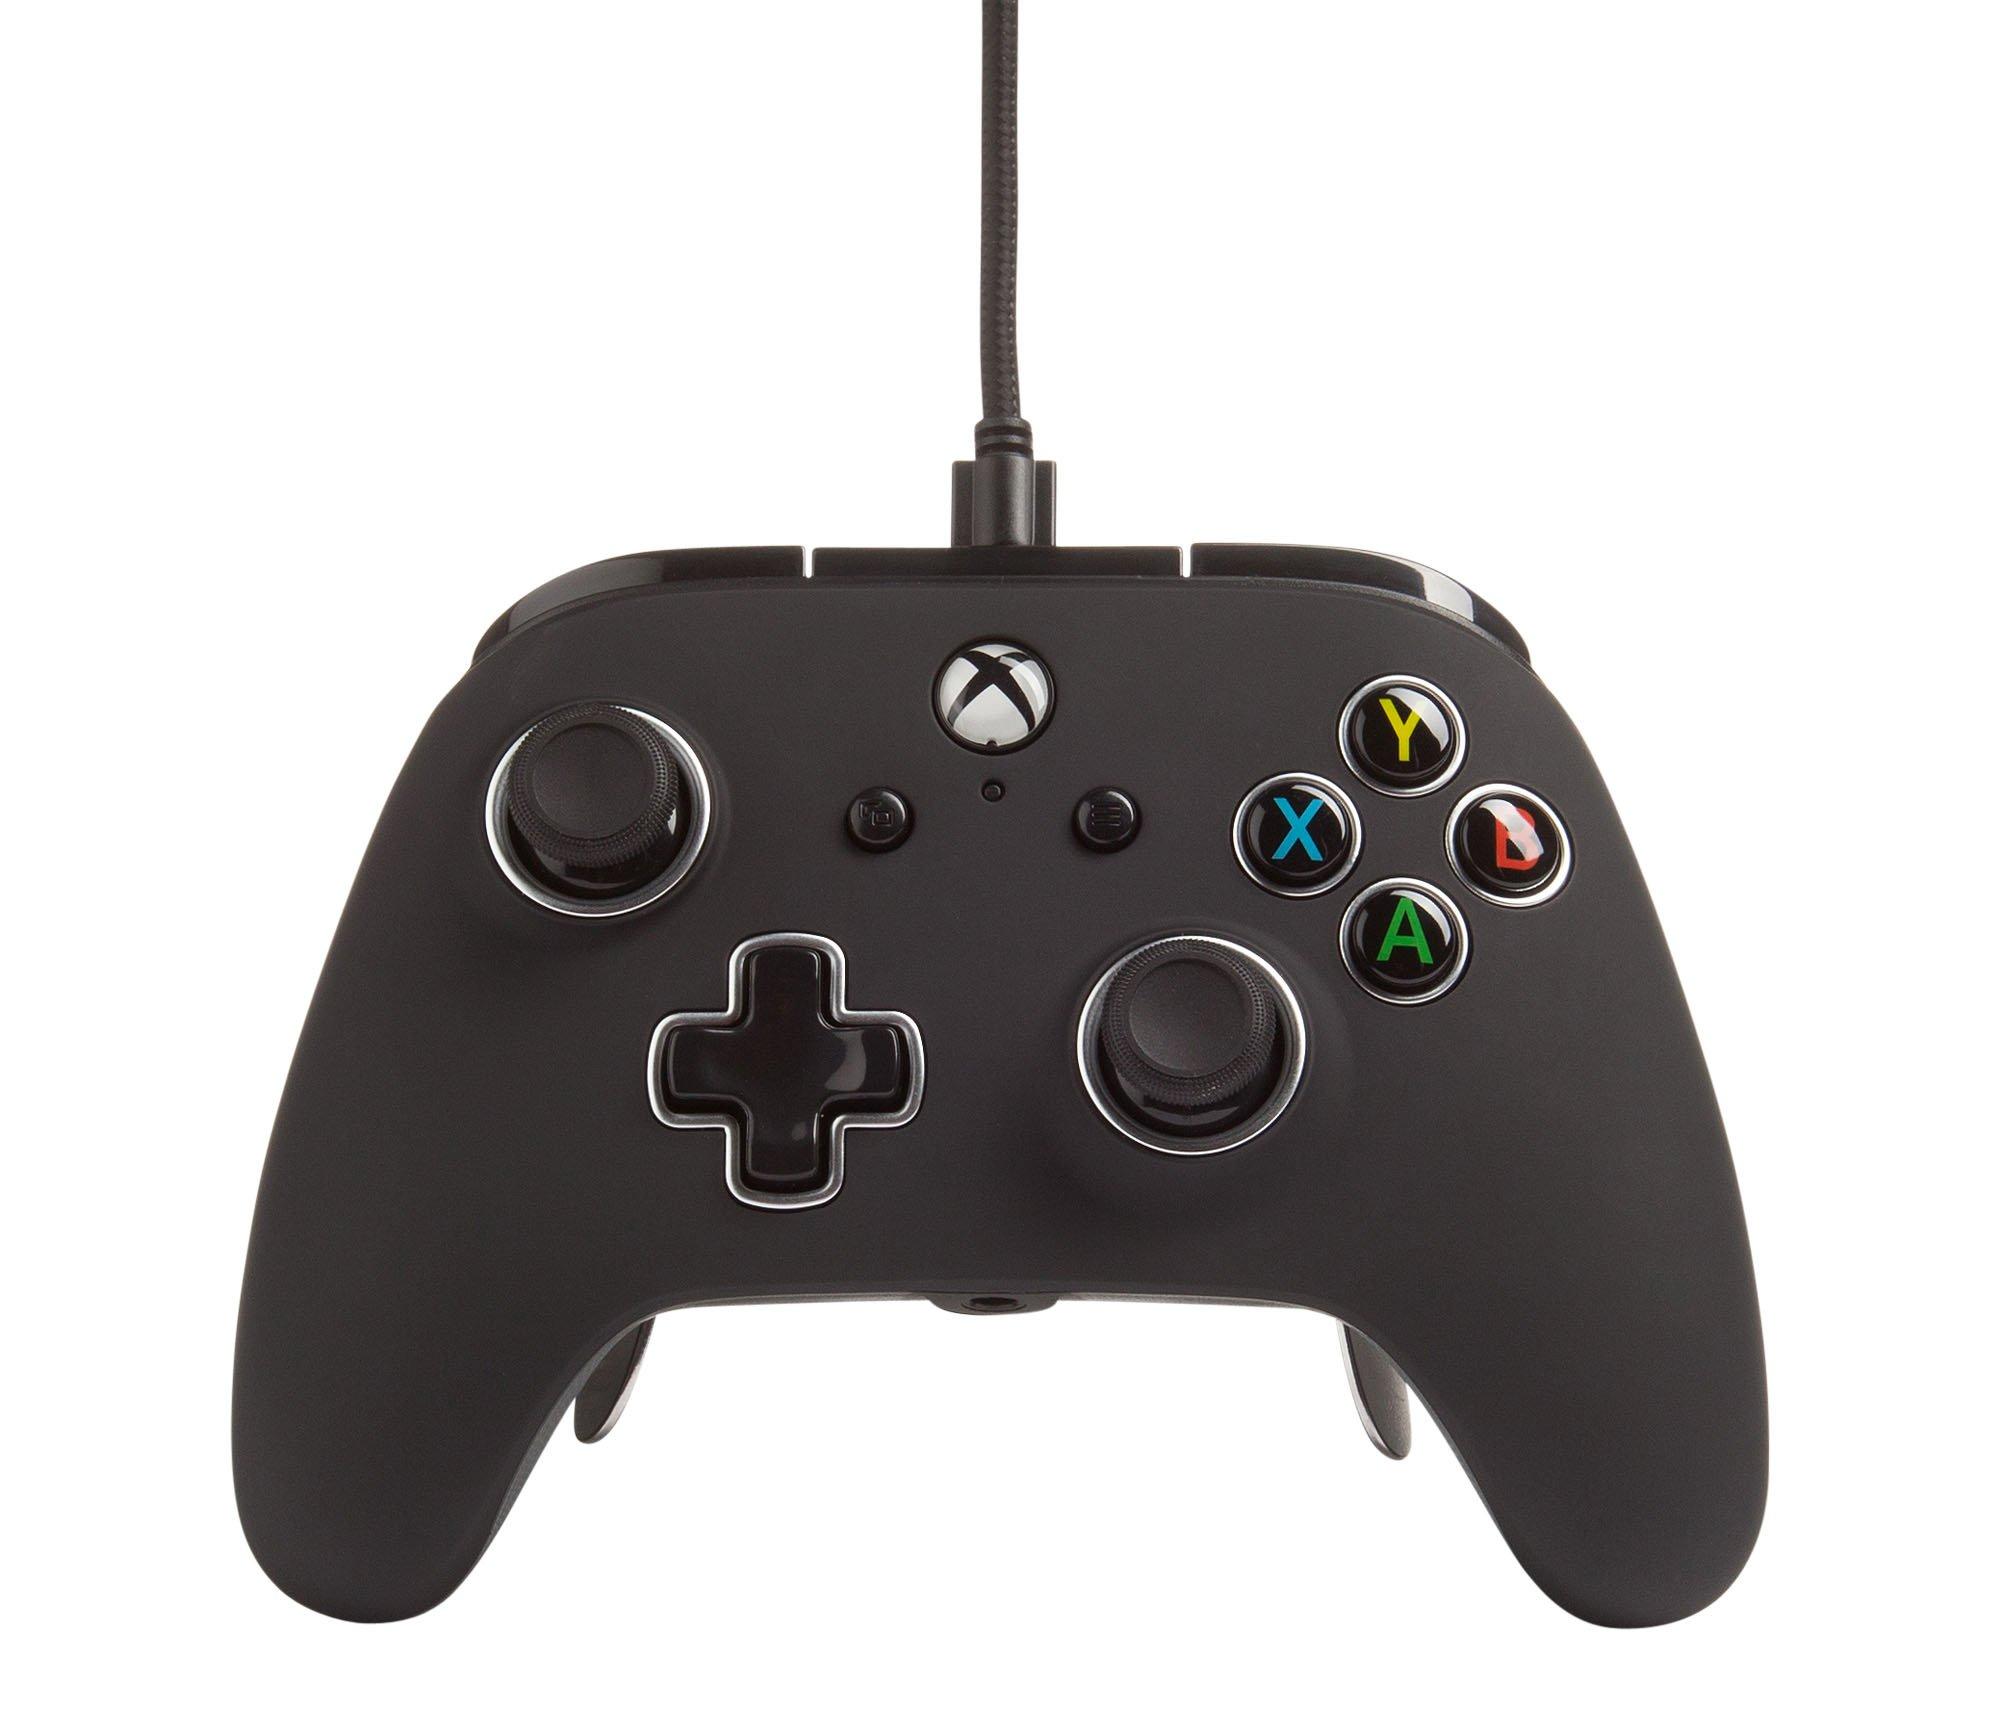 fusion pro wired controller for xbox one